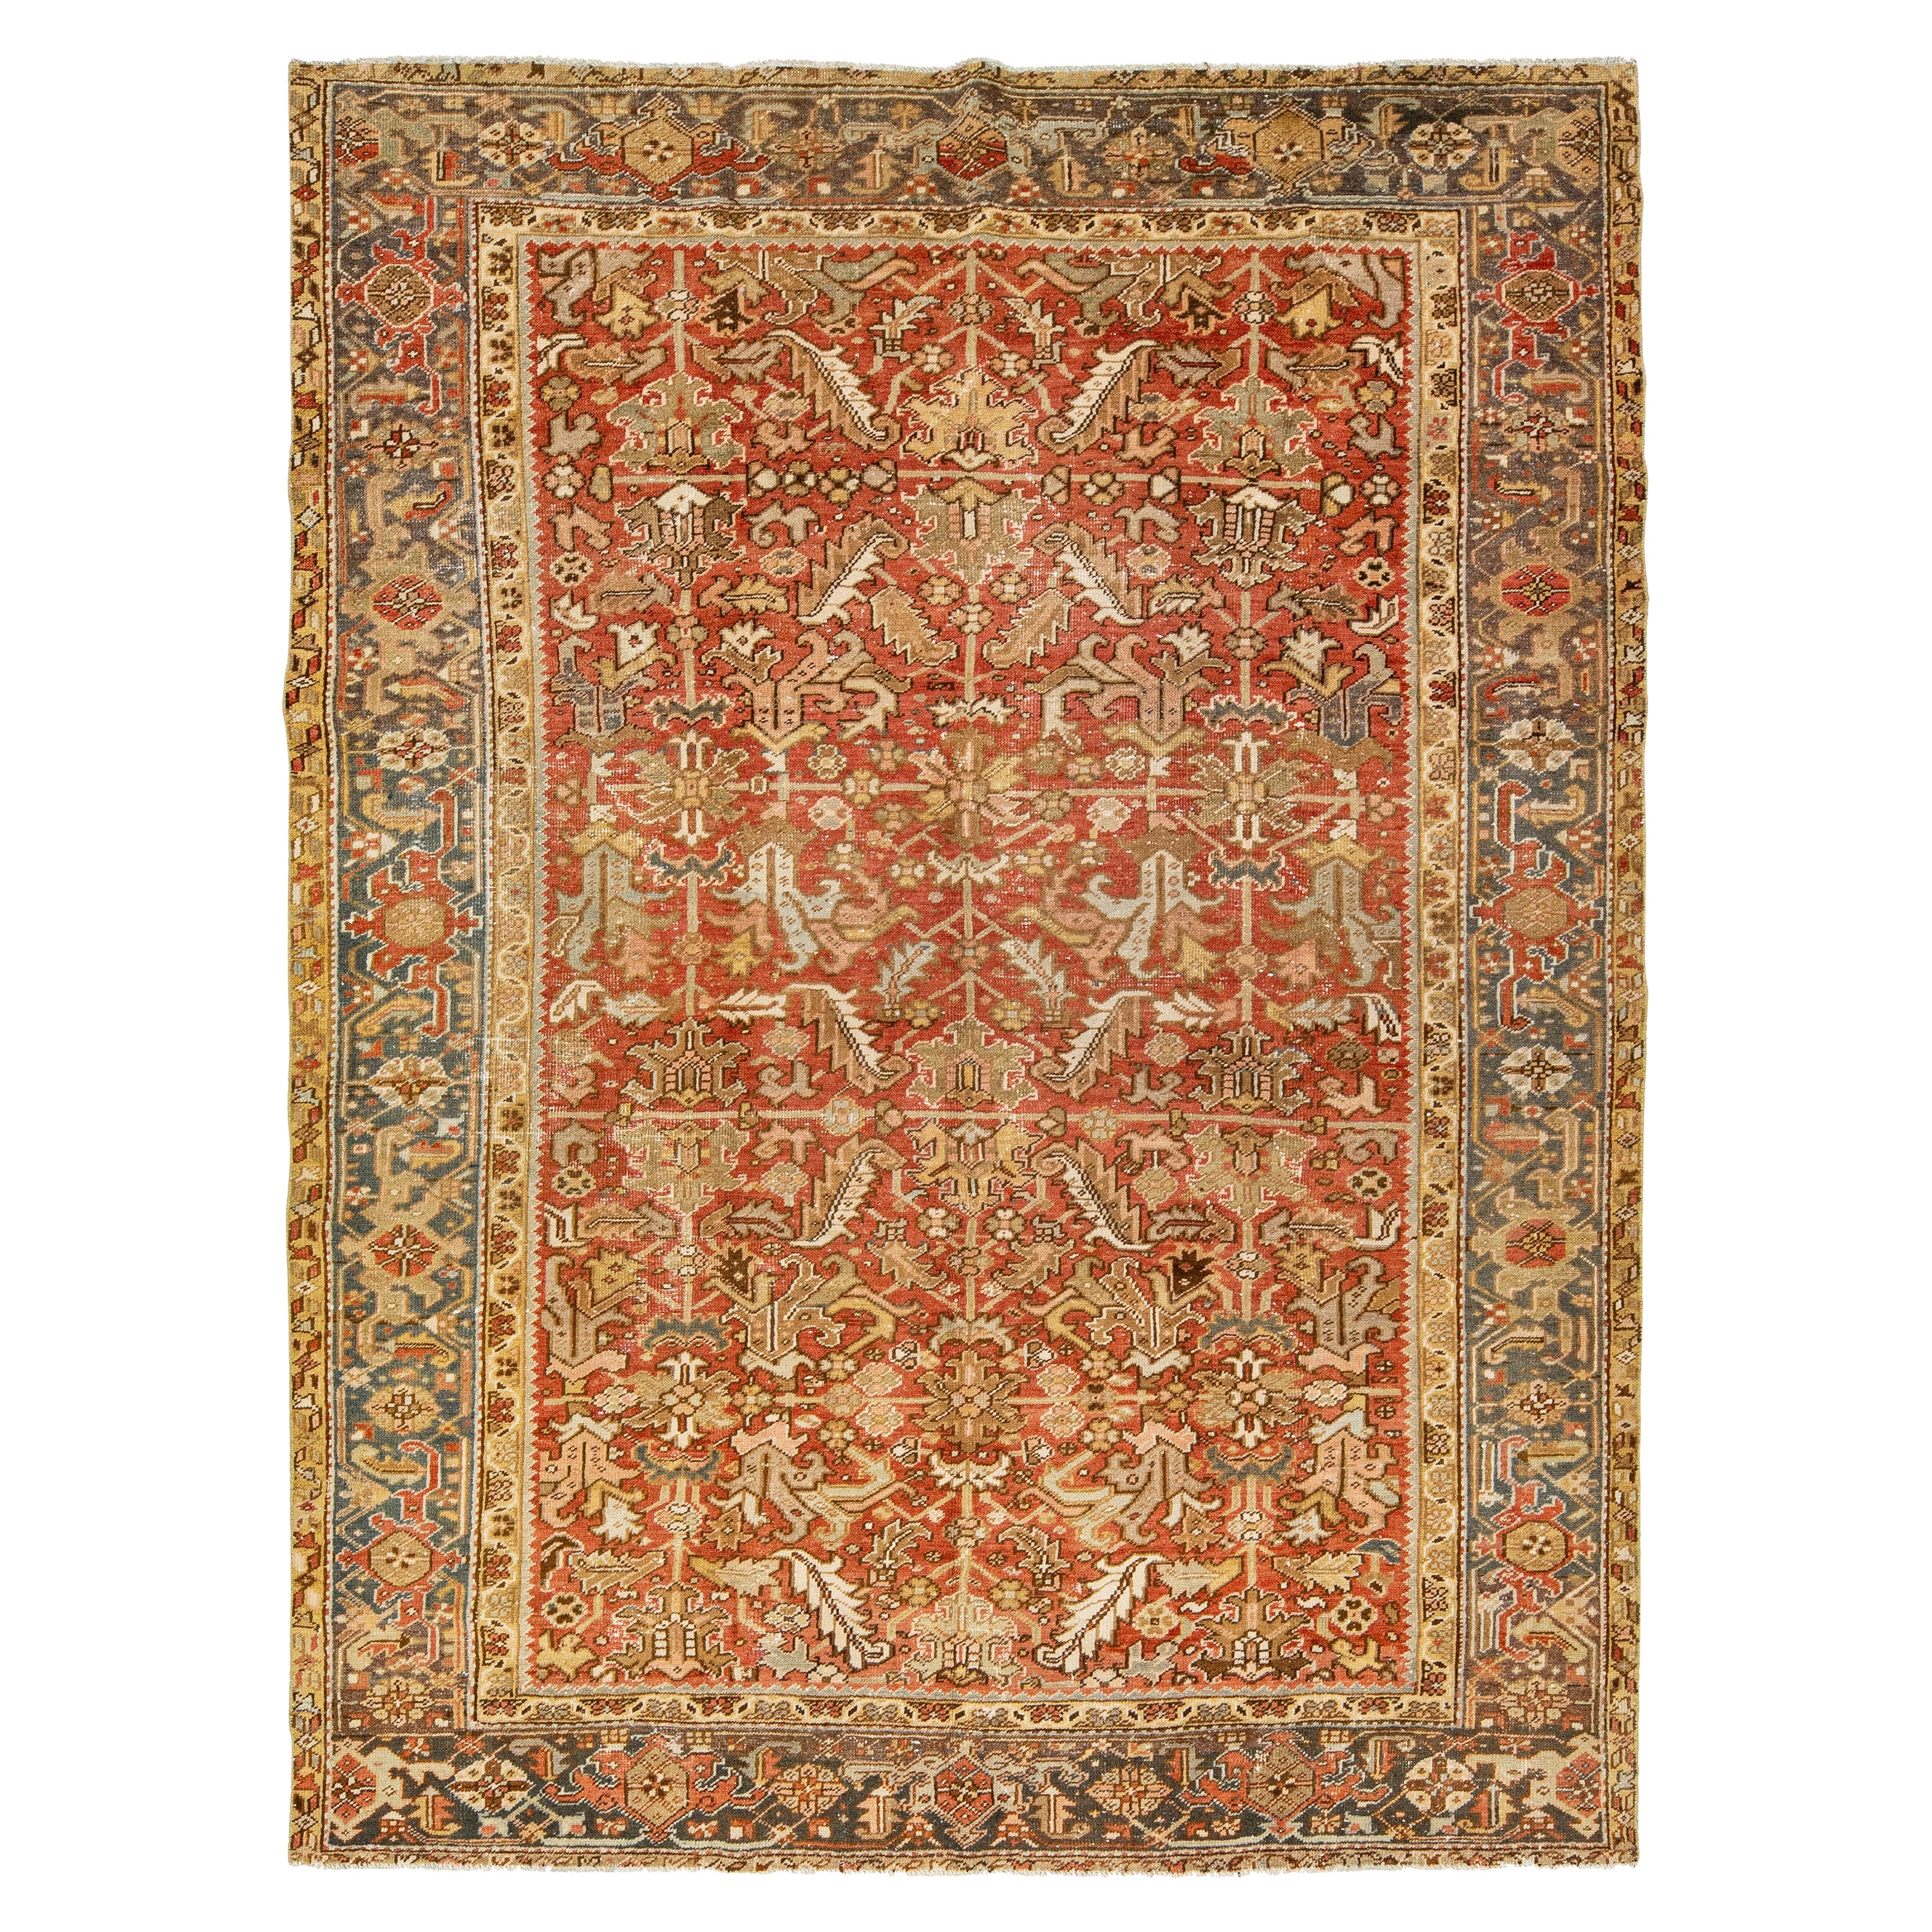 Allover Antique Persian Heriz Wool Rug In Rust Color From The 1920s For Sale